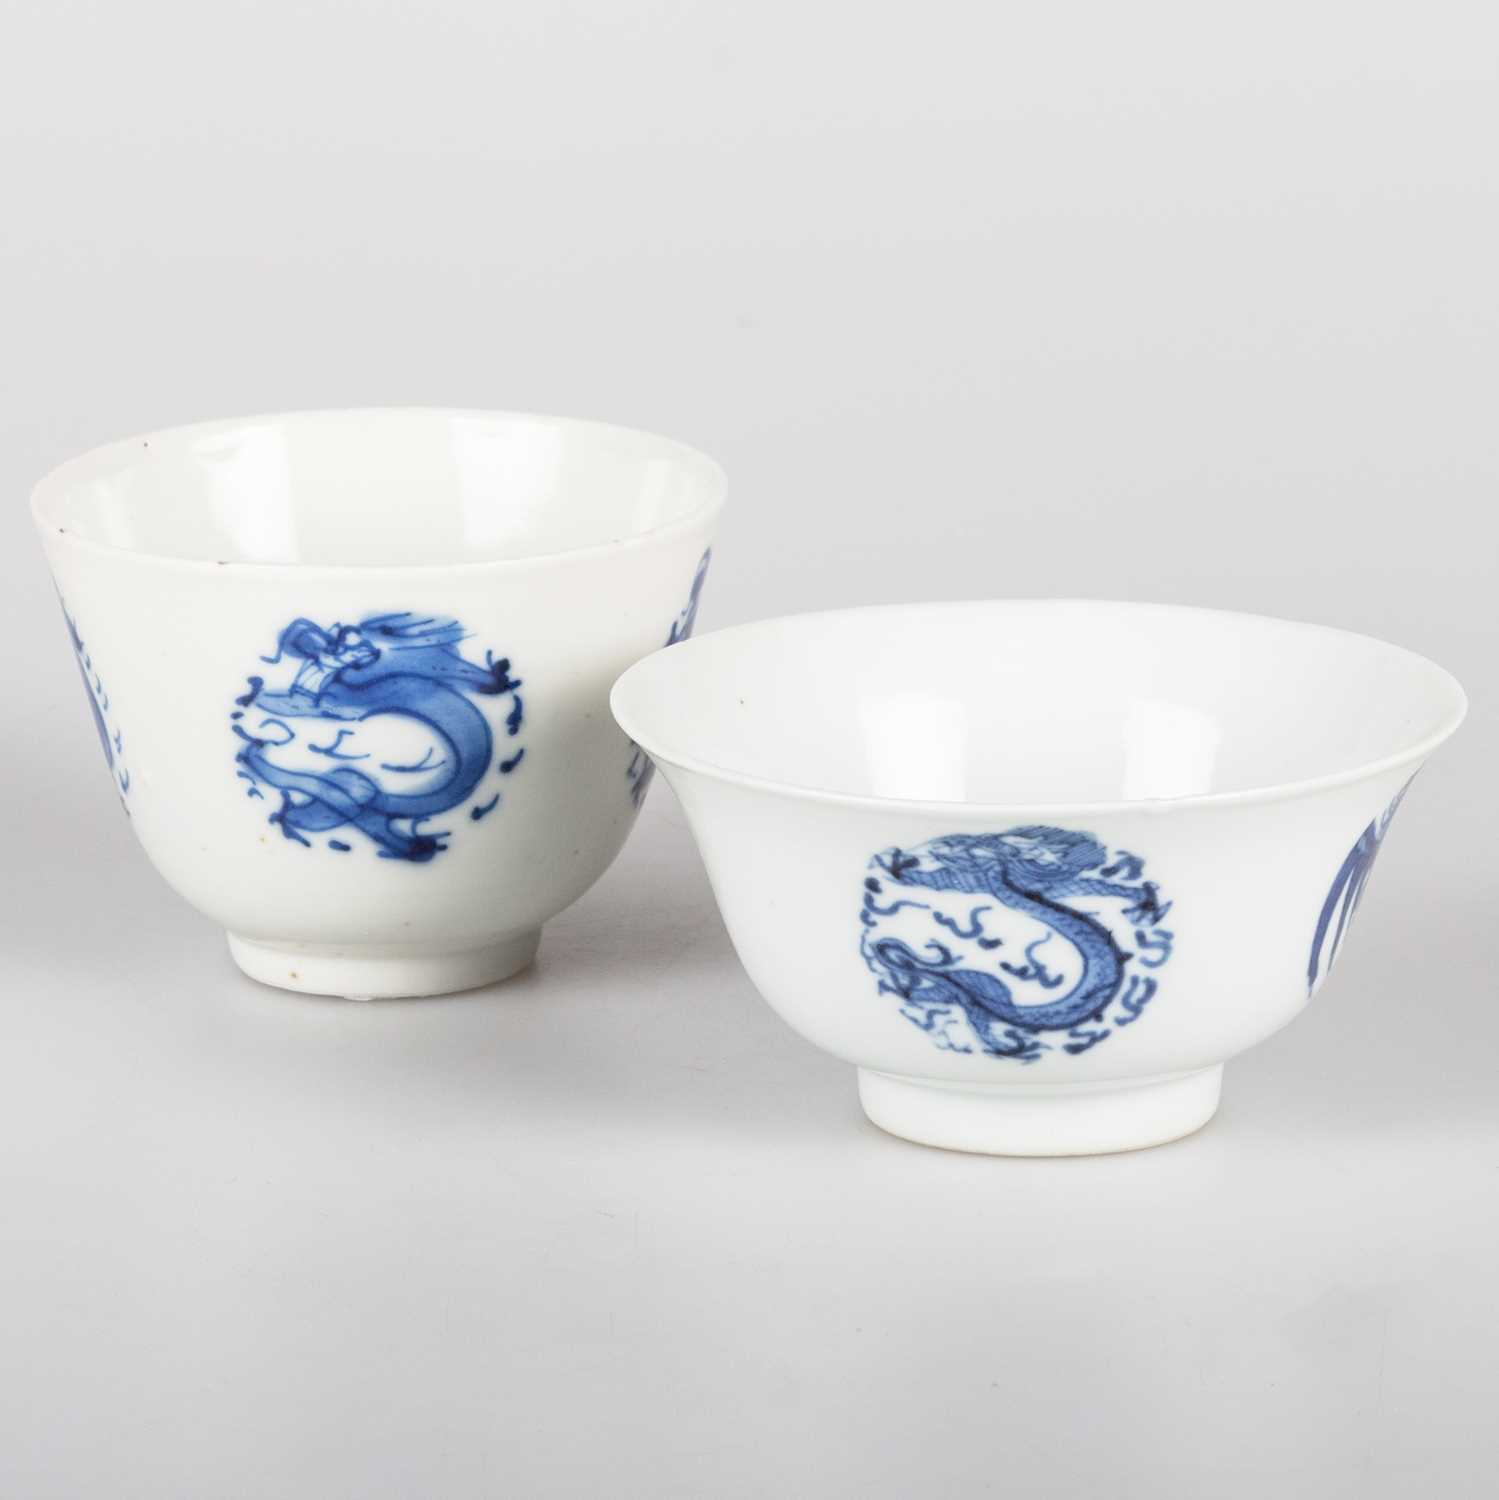 AN 18TH CENTURY CHINESE BLUE AND WHITE BOWL AND A CHINESE BLUE AND WHITE WINE CUP